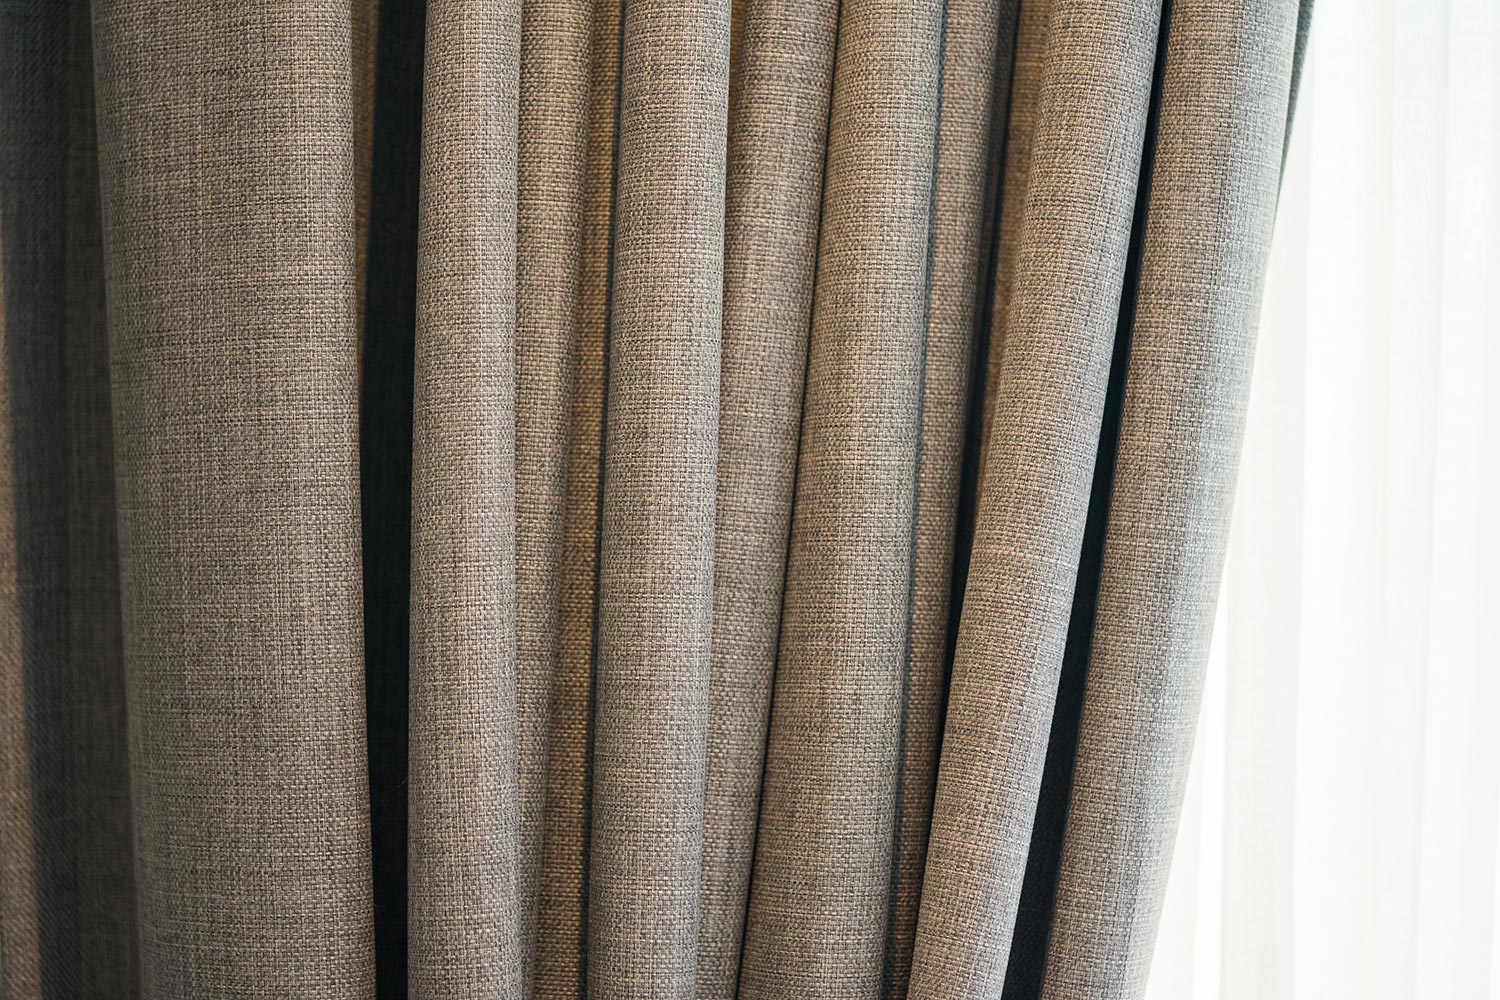 Bright curtain in thin and thick vertical folds made of dense fabric